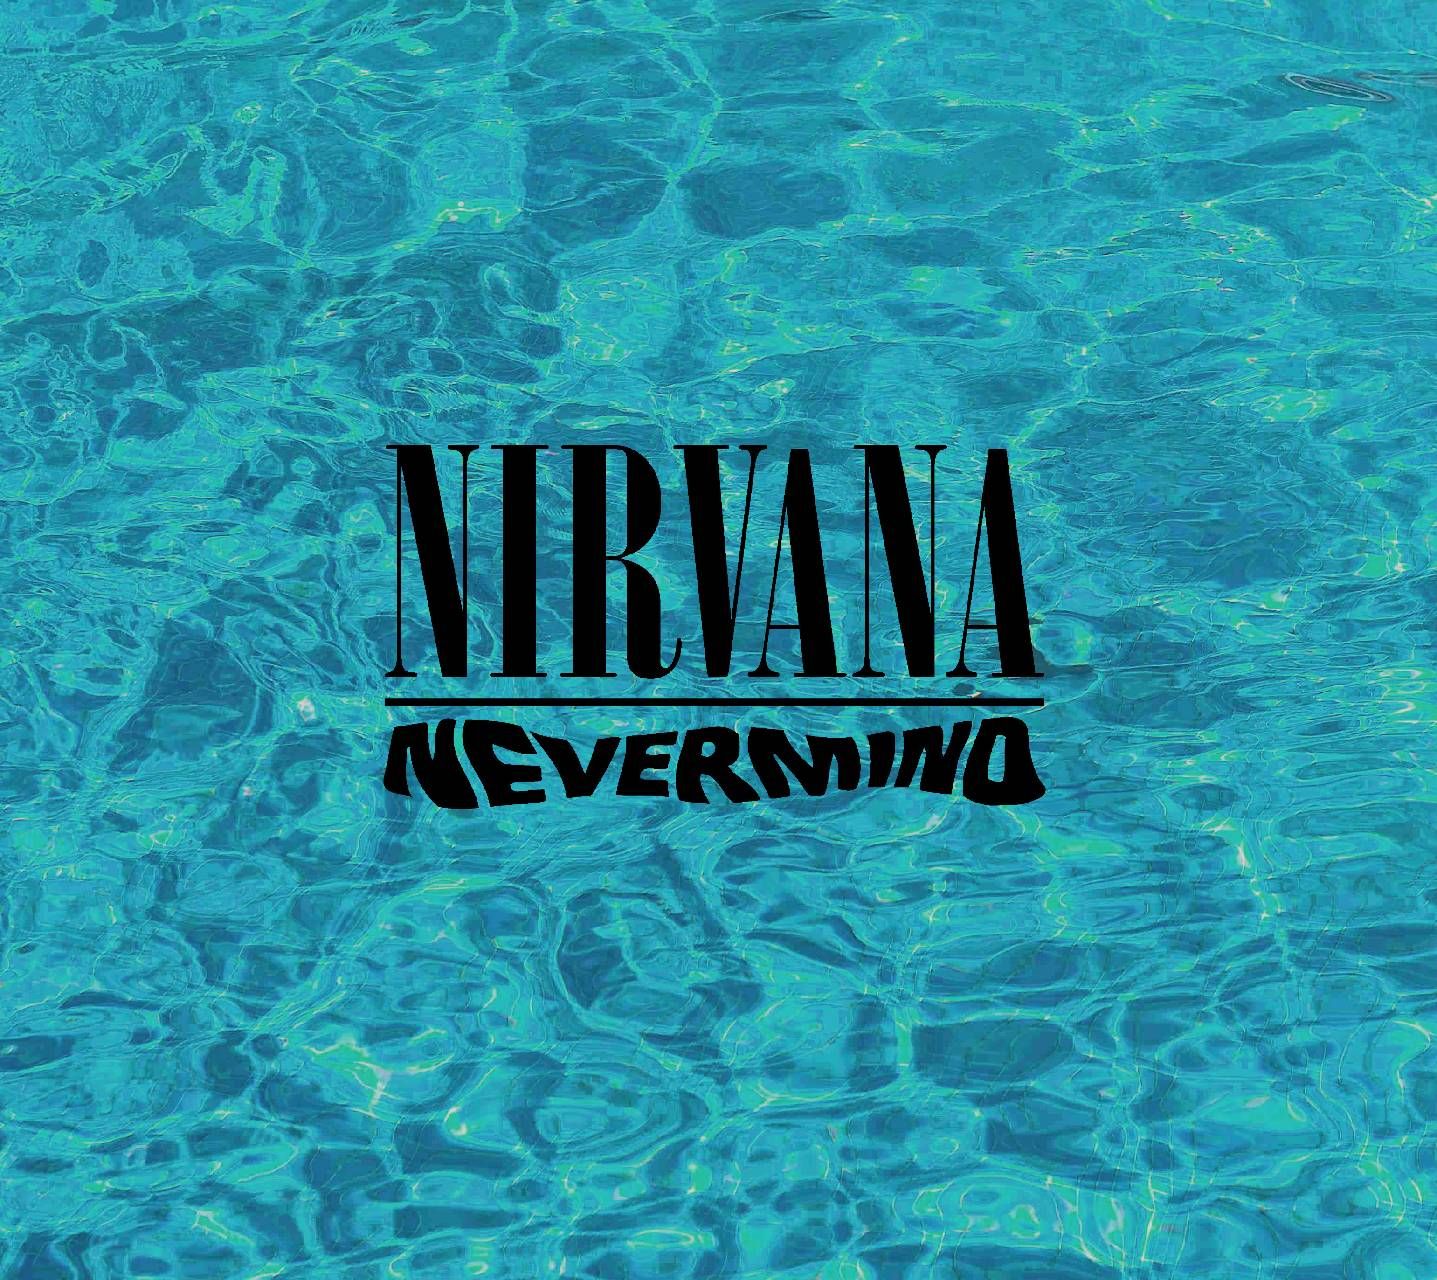 Download Nirvana Nevermind Wallpaper by Brotanium now. Browse millions of popular 19. Nirvana poster, Nirvana wallpaper, Nirvana album cover